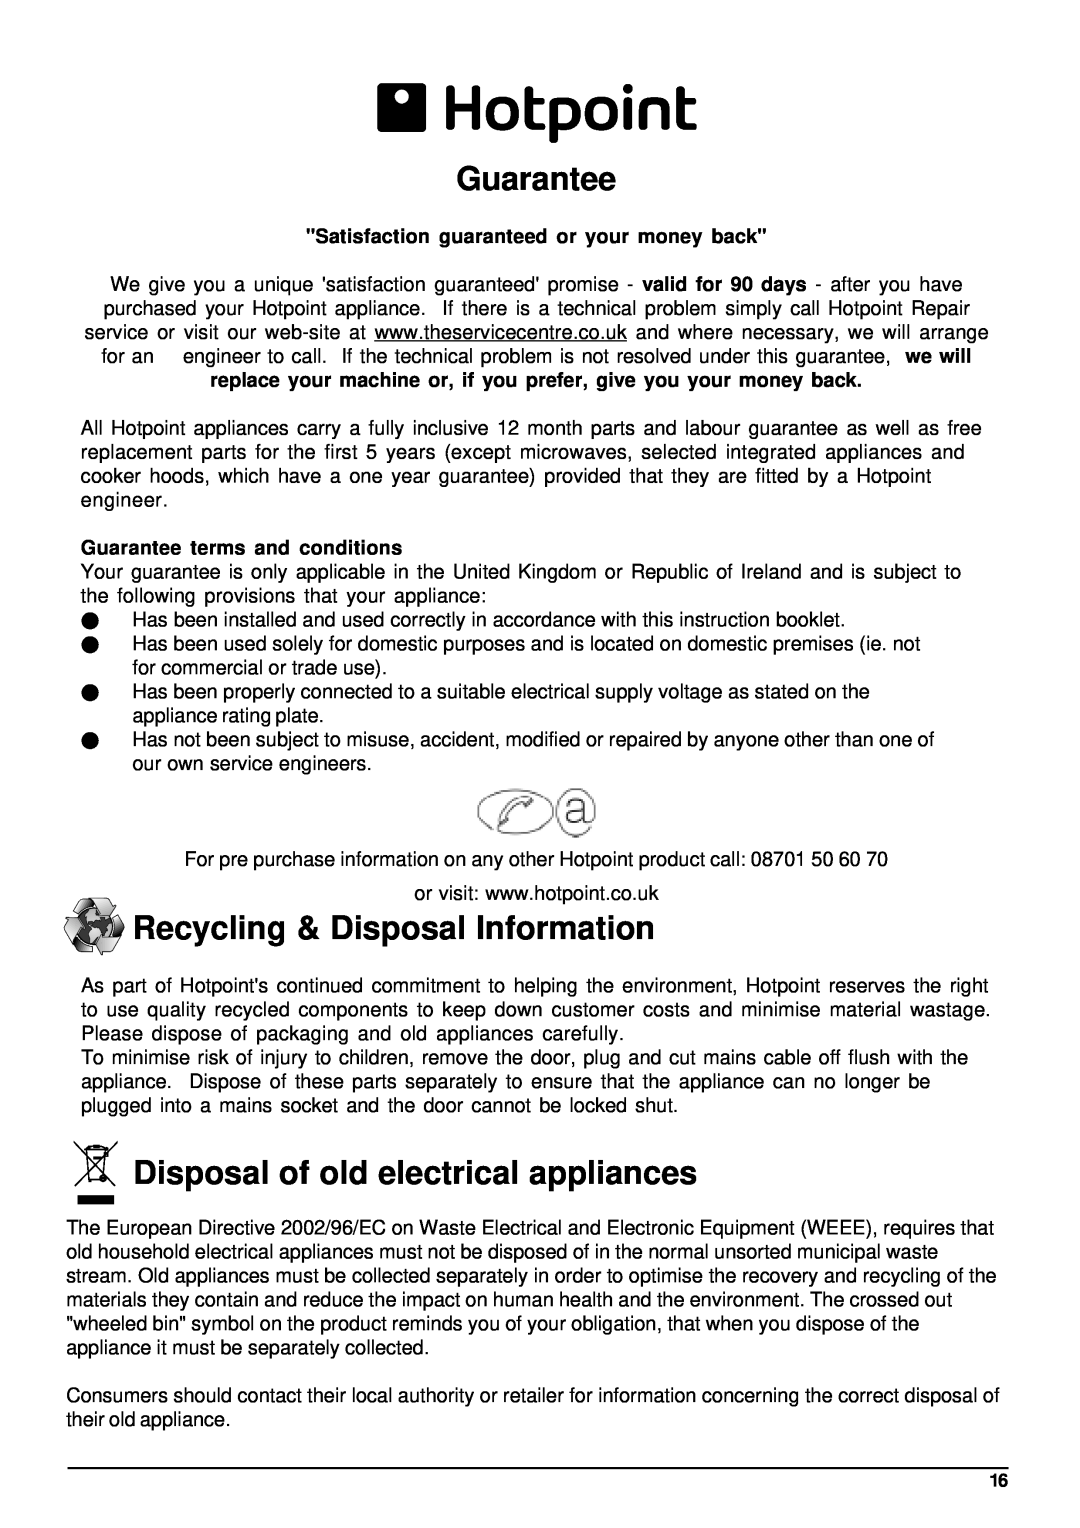 Hotpoint BFZ 680 manual Guarantee, Recycling & Disposal Information, Disposal of old electrical appliances 